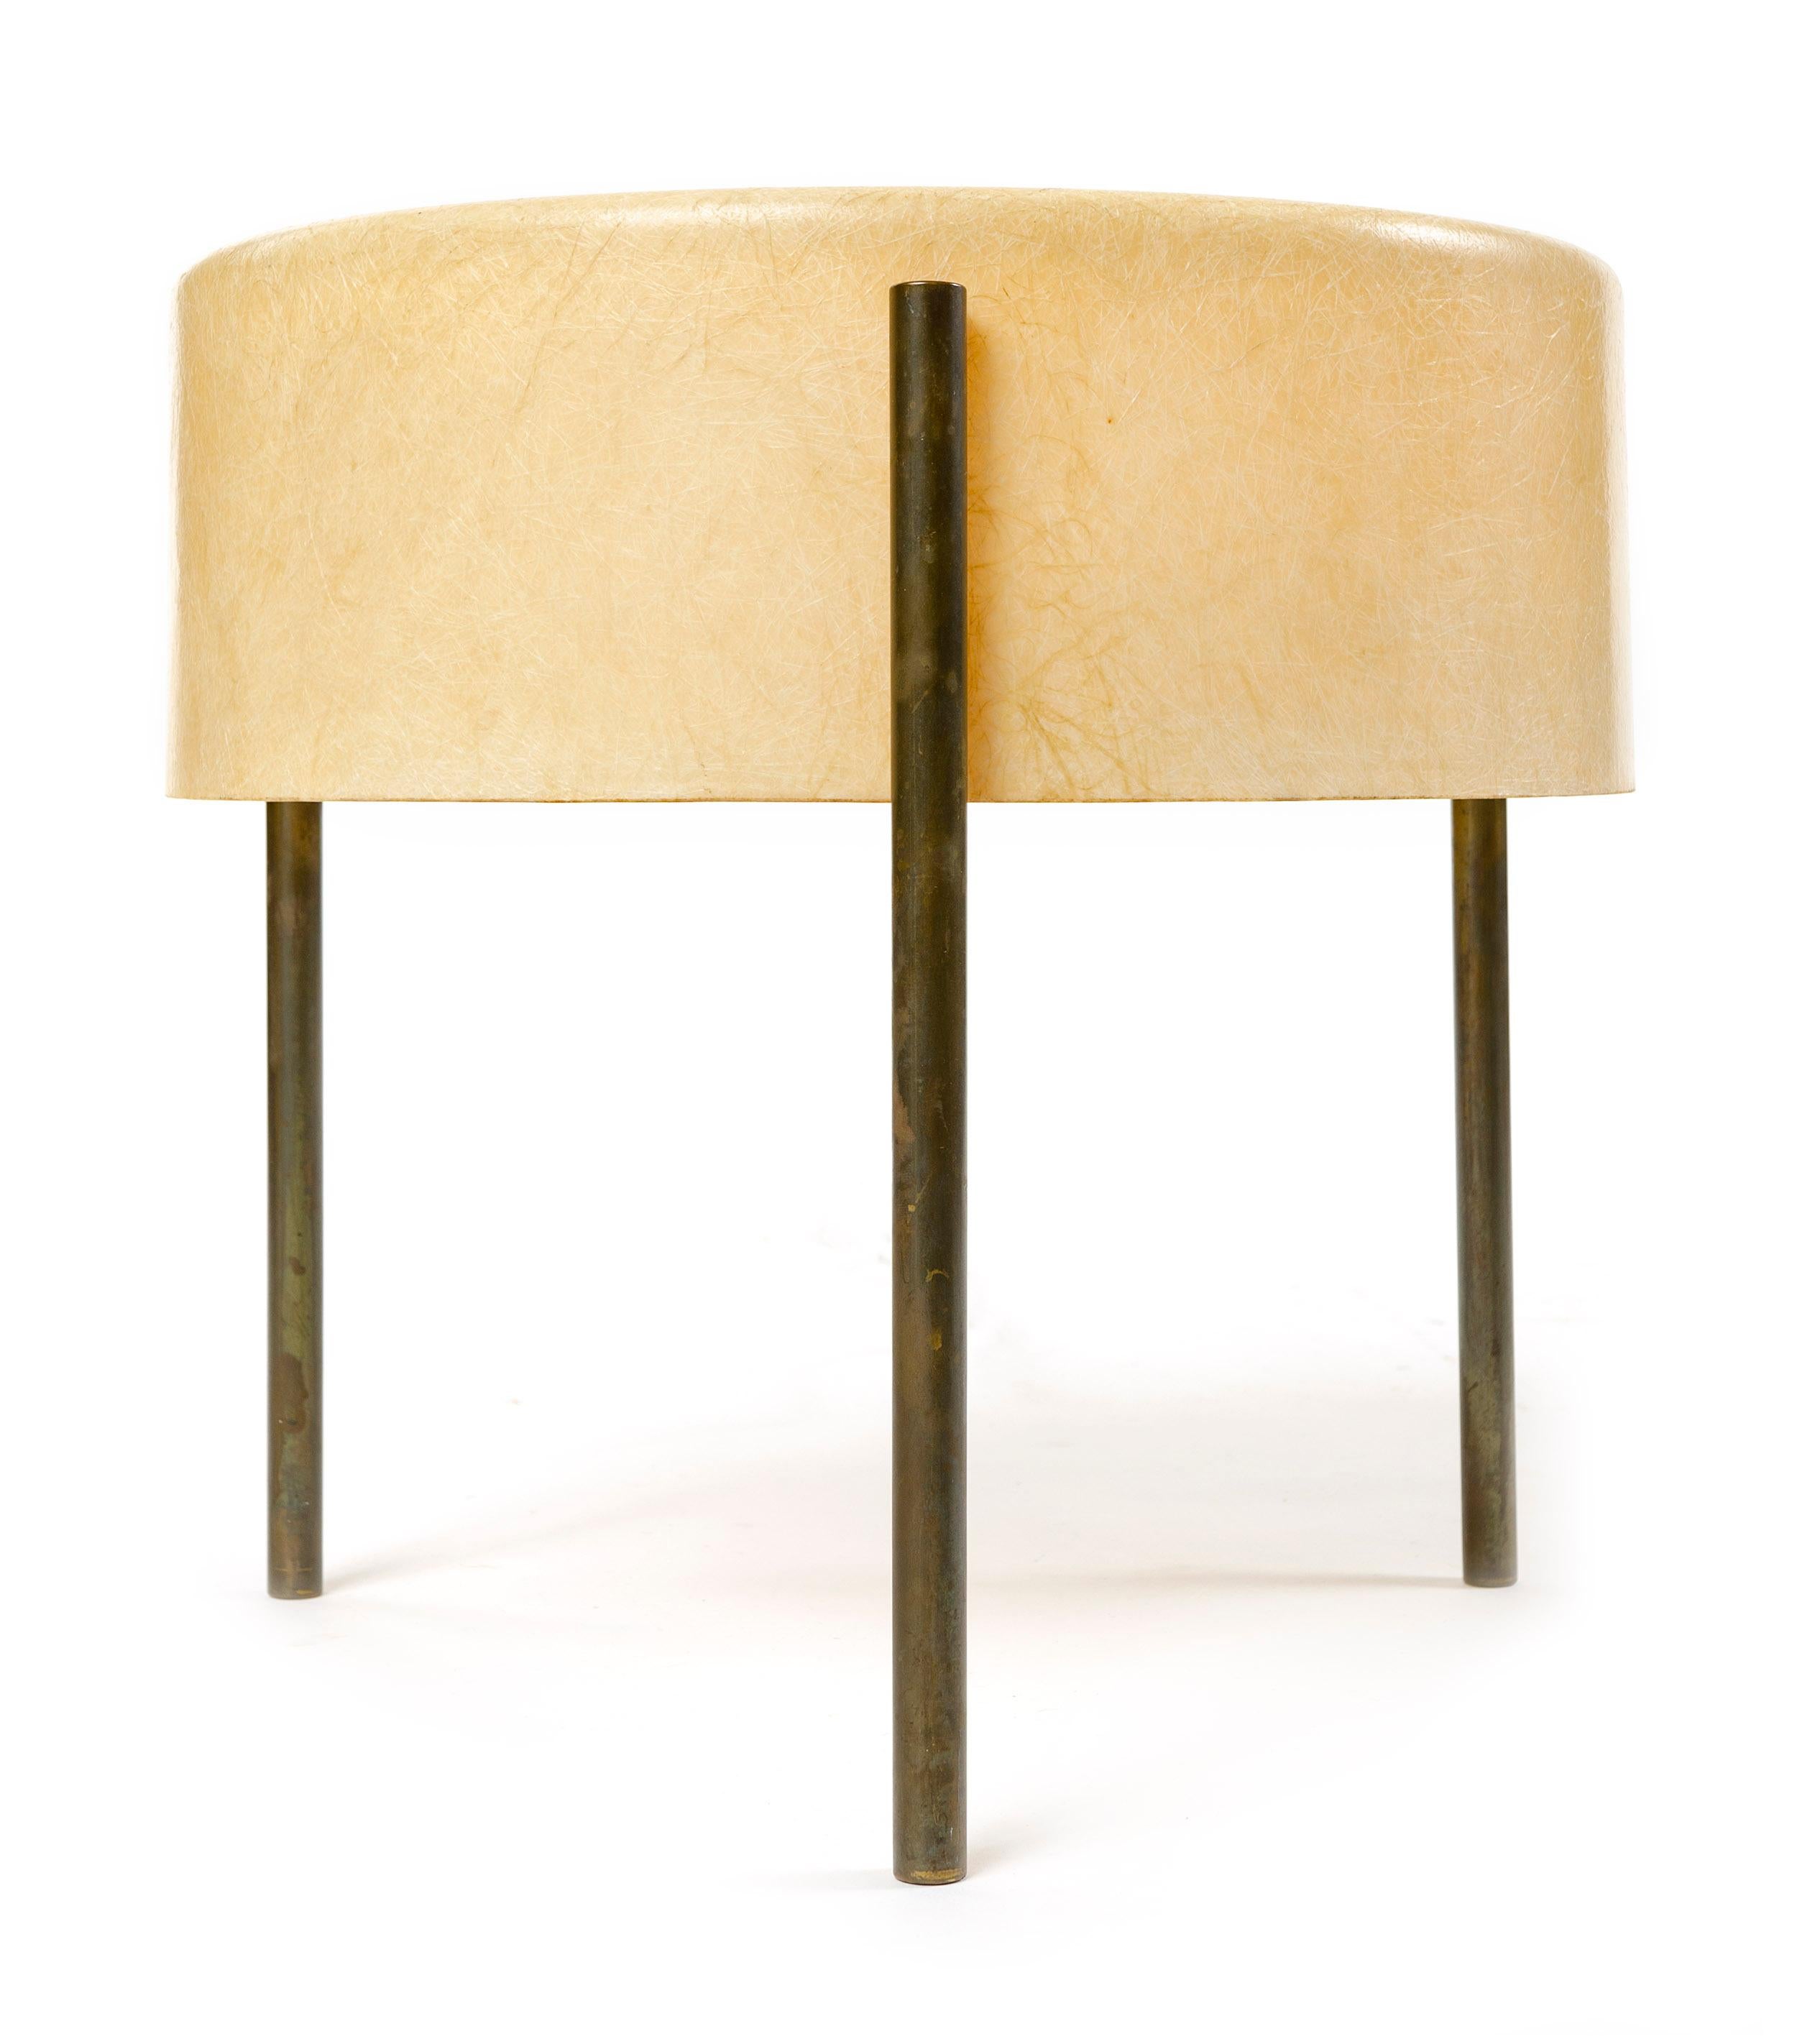 A Mid-Century Modern molded fiberglass shade supported by three (3) brass legs. Designed by Bill Lam, manufactured in the USA, 1950s.
Model 'LL-130'.